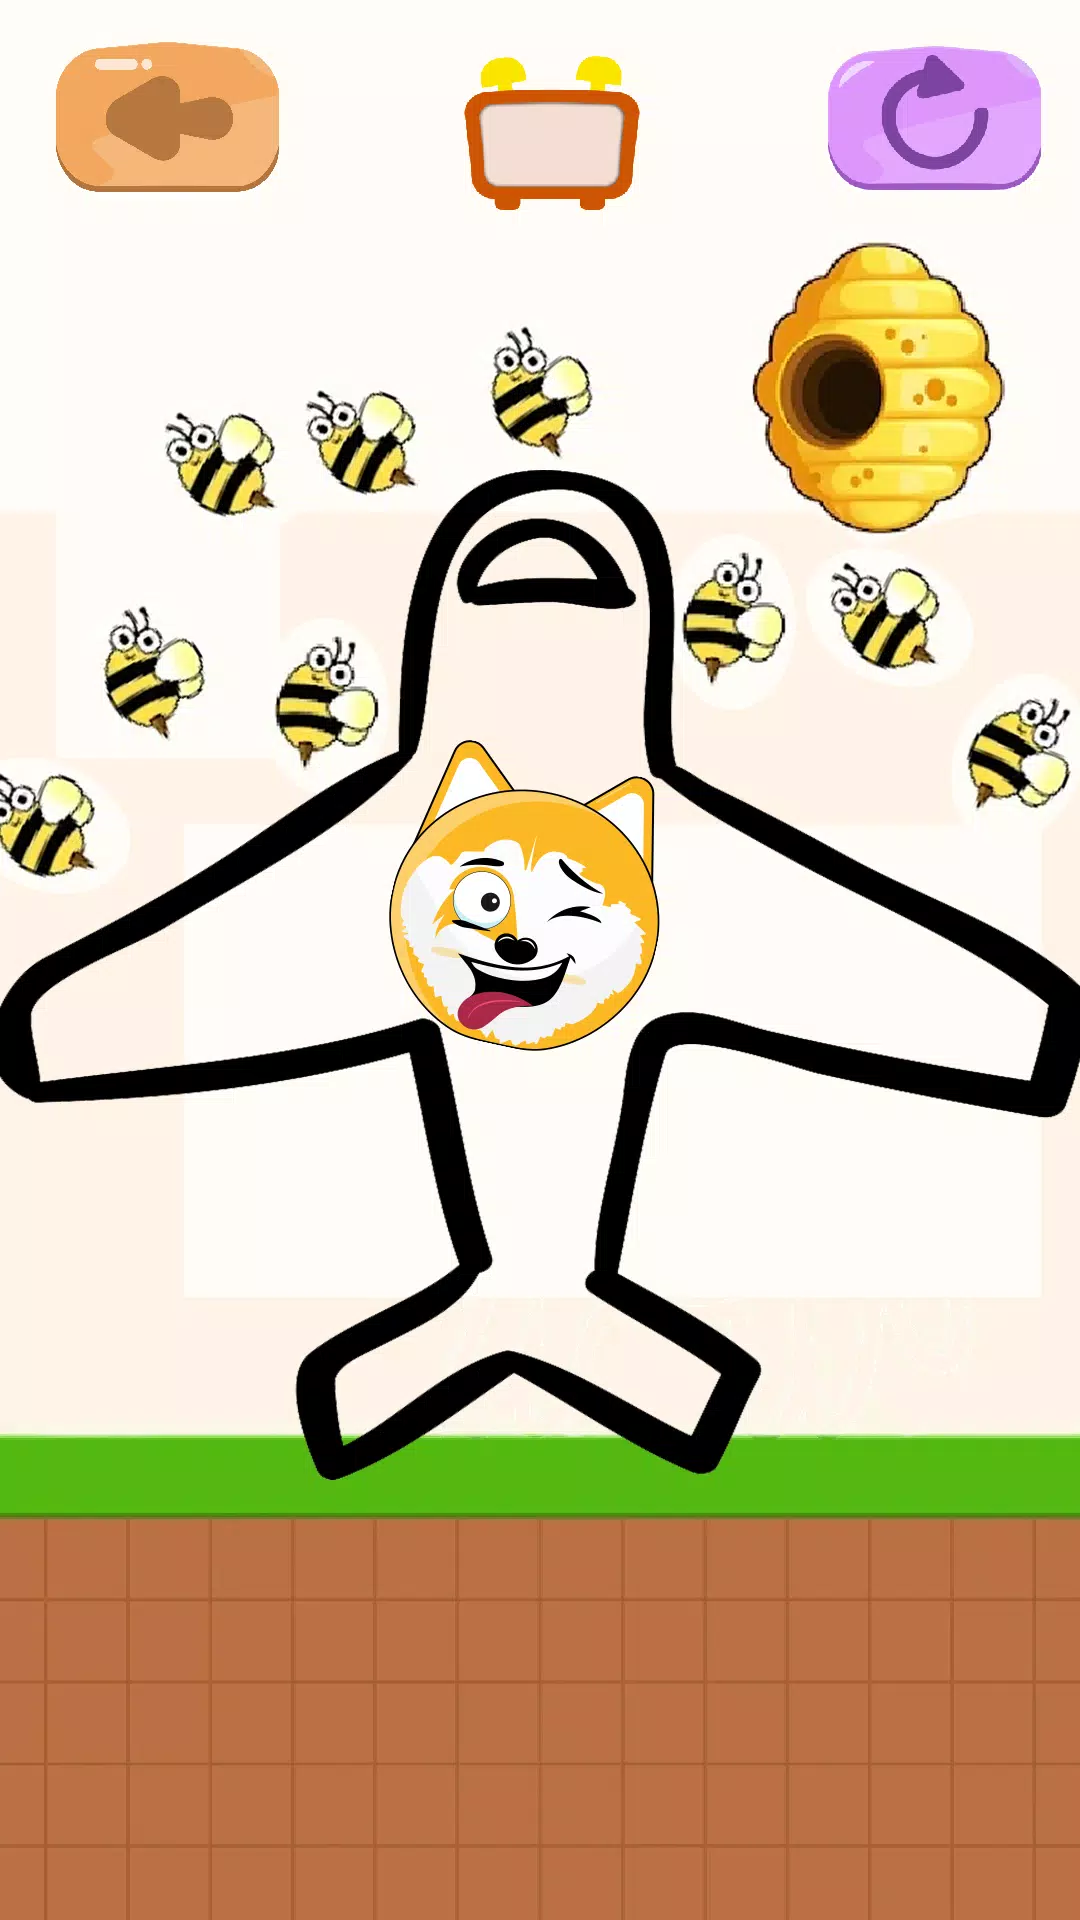 About: Save The Dogi 2 - Dog Bee Draw (Google Play version)